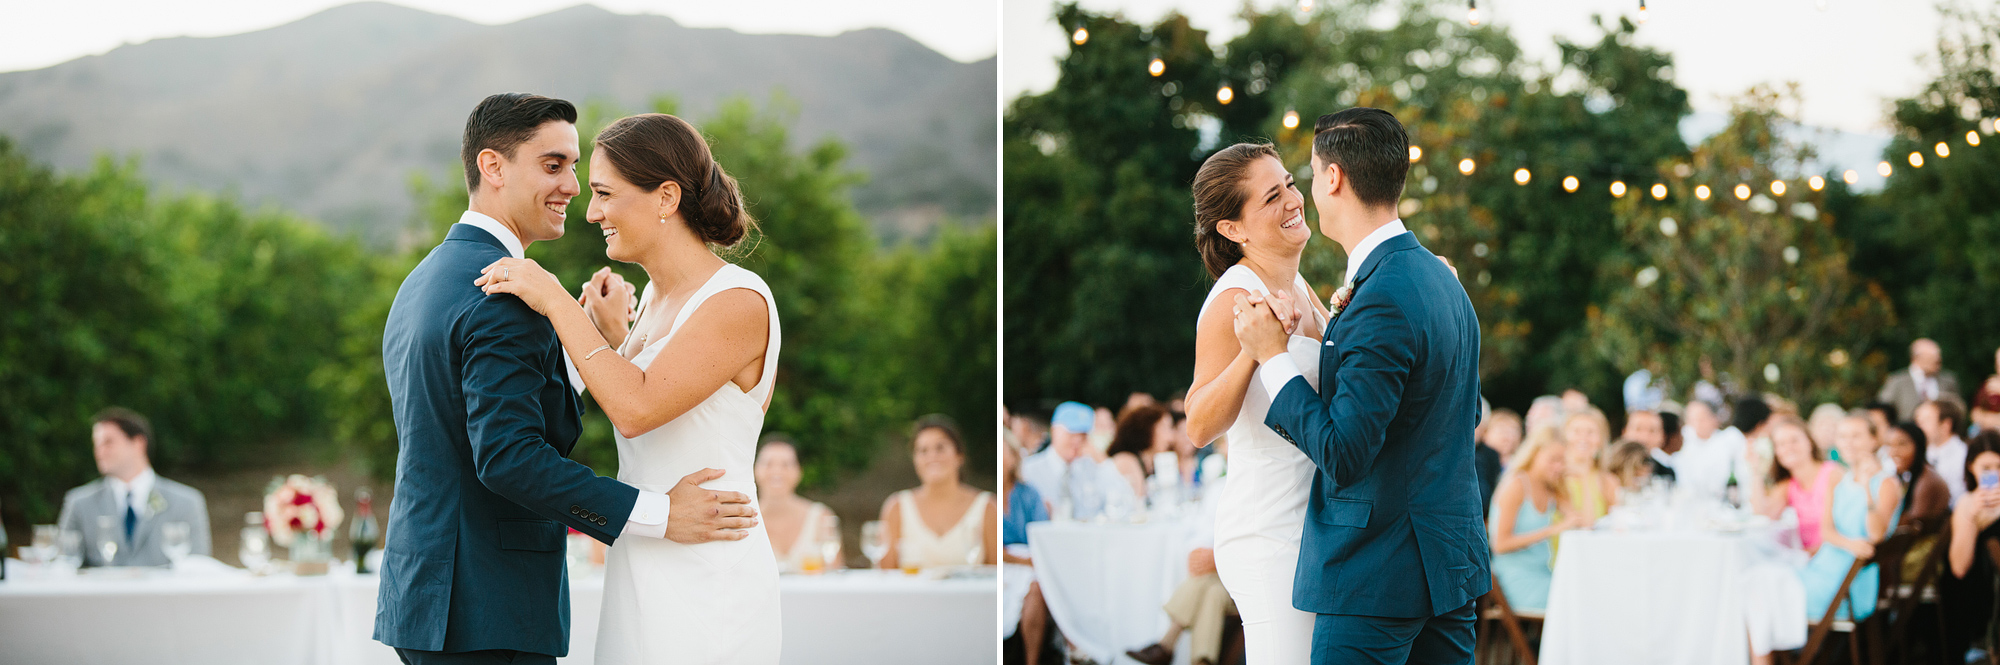 Sweet moments between the bride and groom during their first dance. 